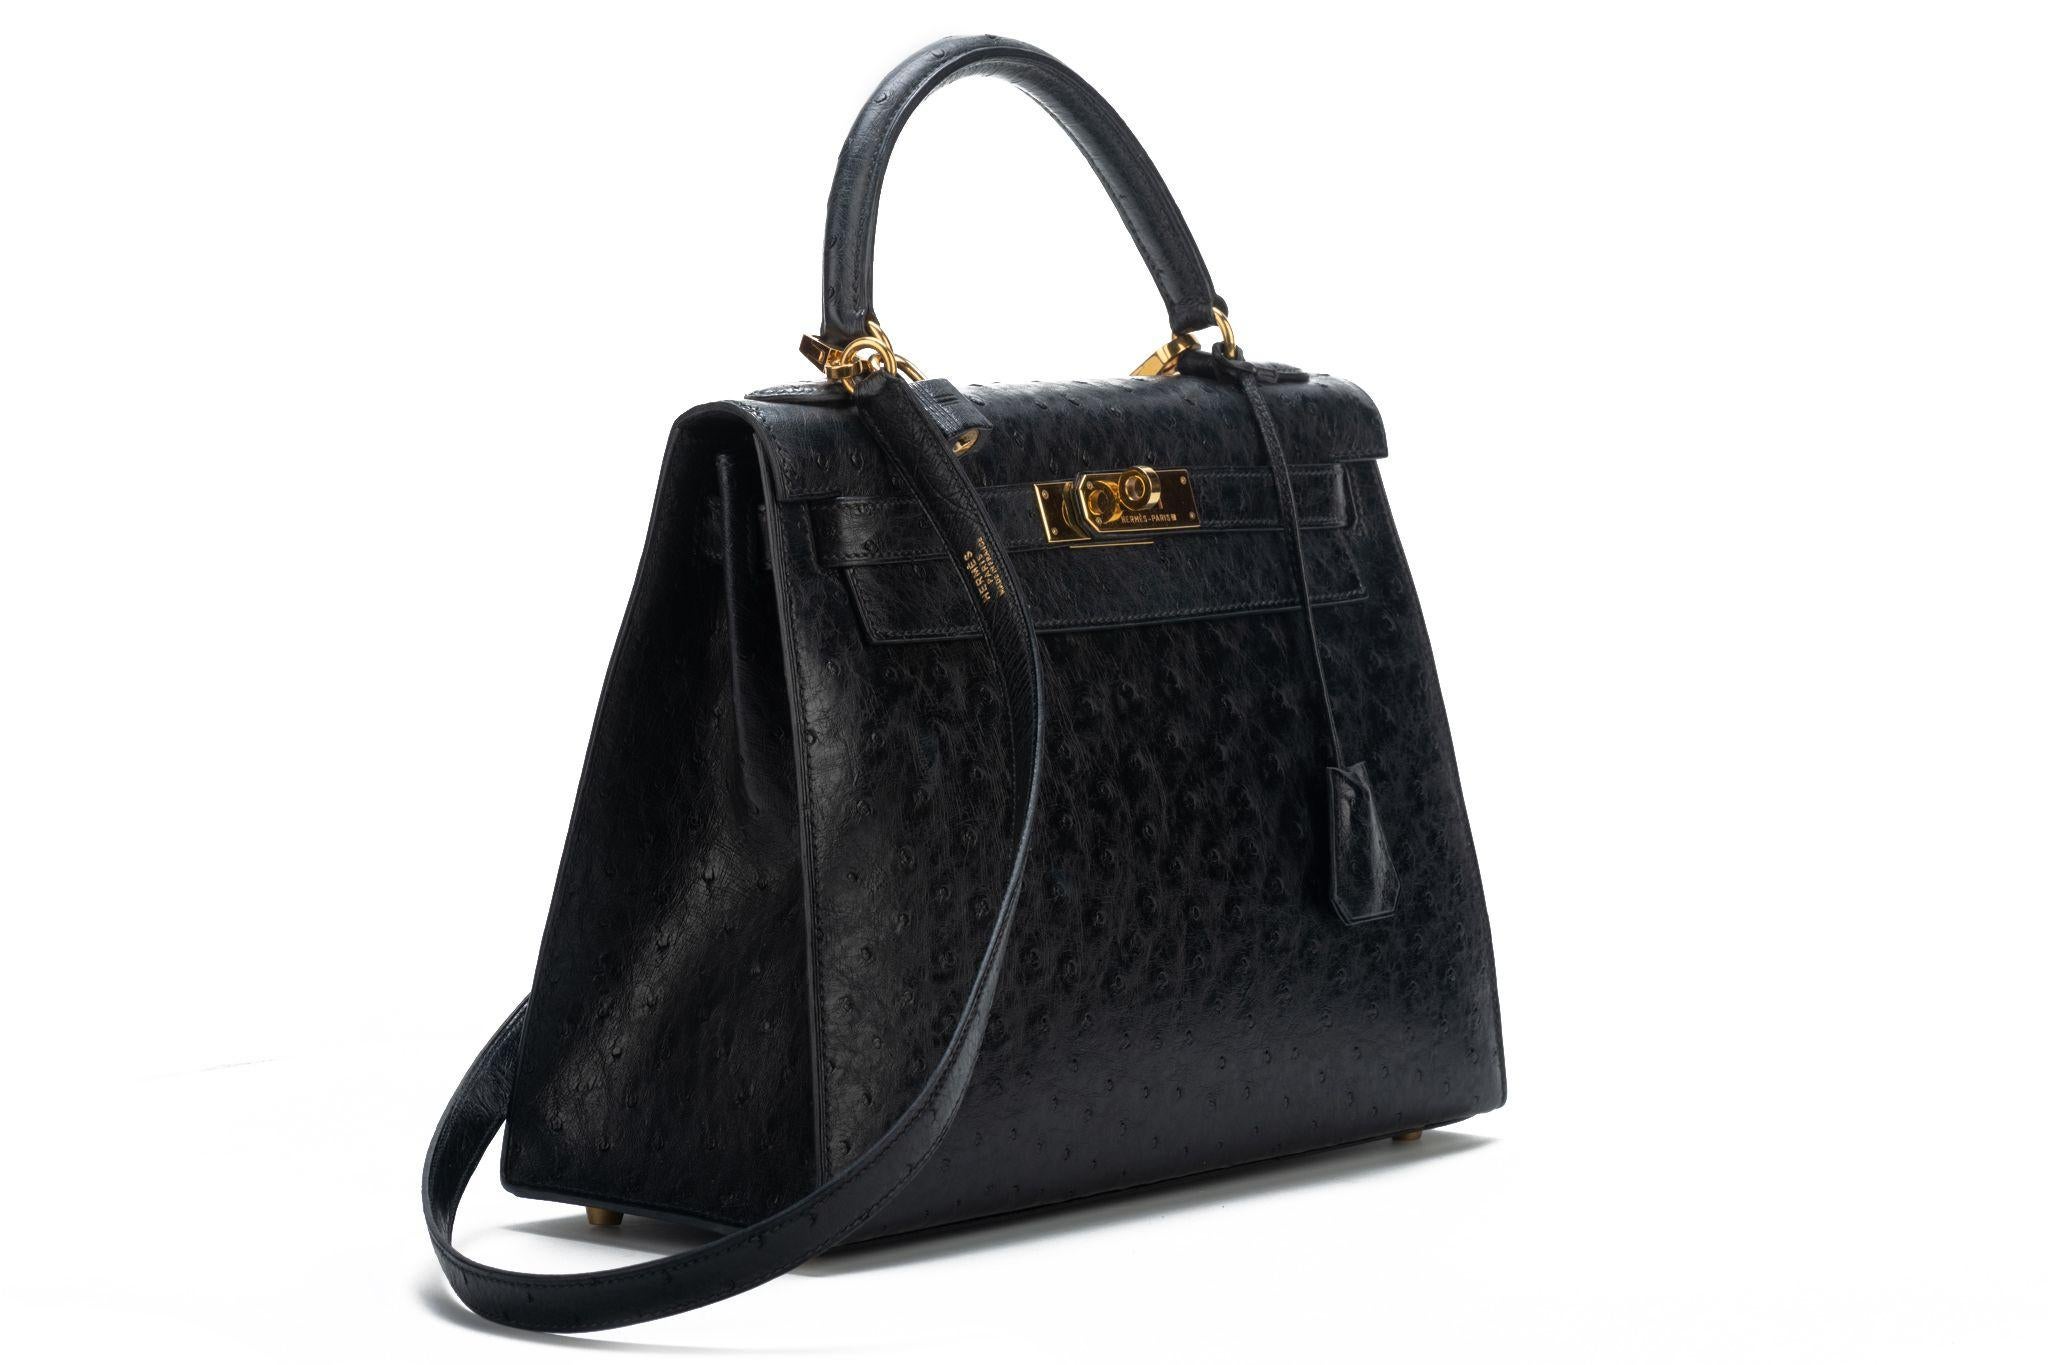 Hermes rare and collectible Kelly Bag 28 sellier in black ostrich leather and gold tone hardware. Date stamp X for 1994. Detachable strap. Comes with clochette, tirette, lock, keys, original box.